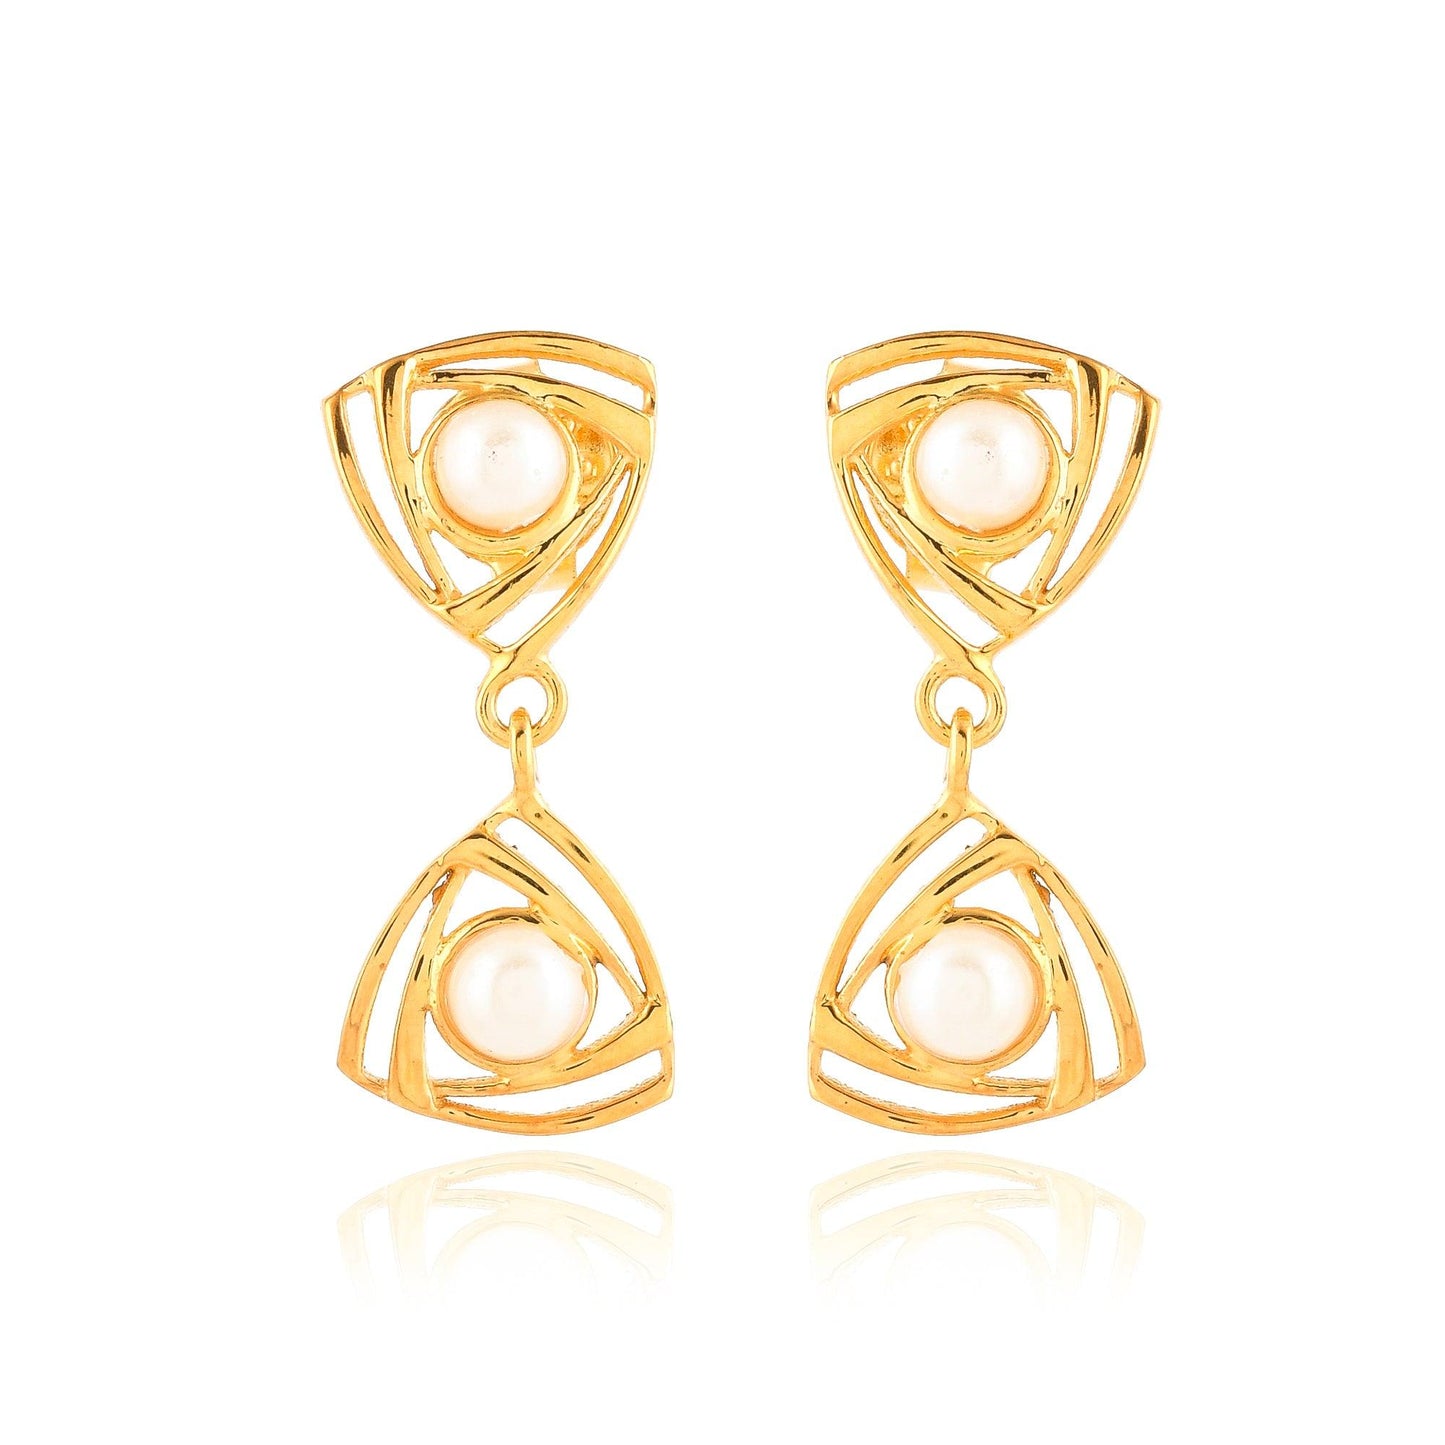 Triangular Dangler Pearl Earring| 925 Silver| Gold Plated - From Purl Purl